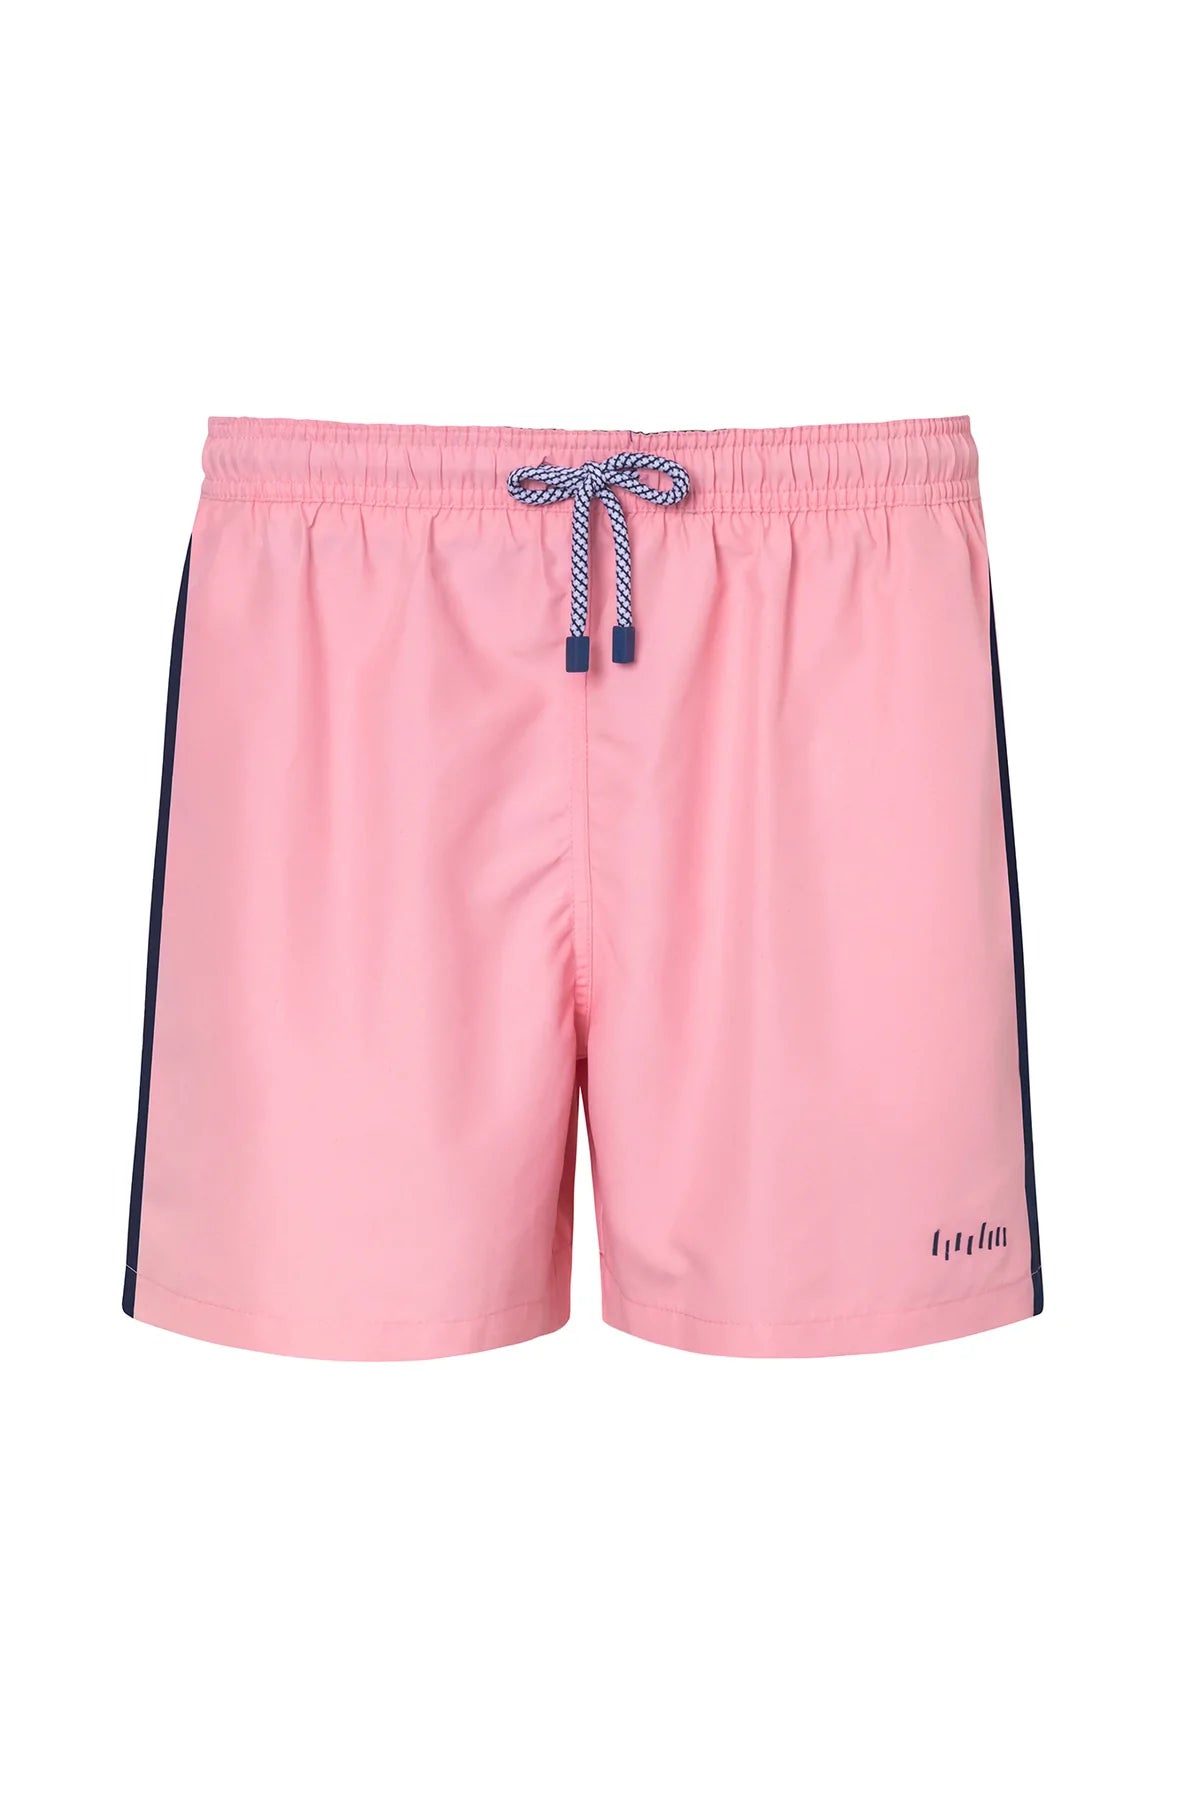 Pink And Navy Swim Trunks